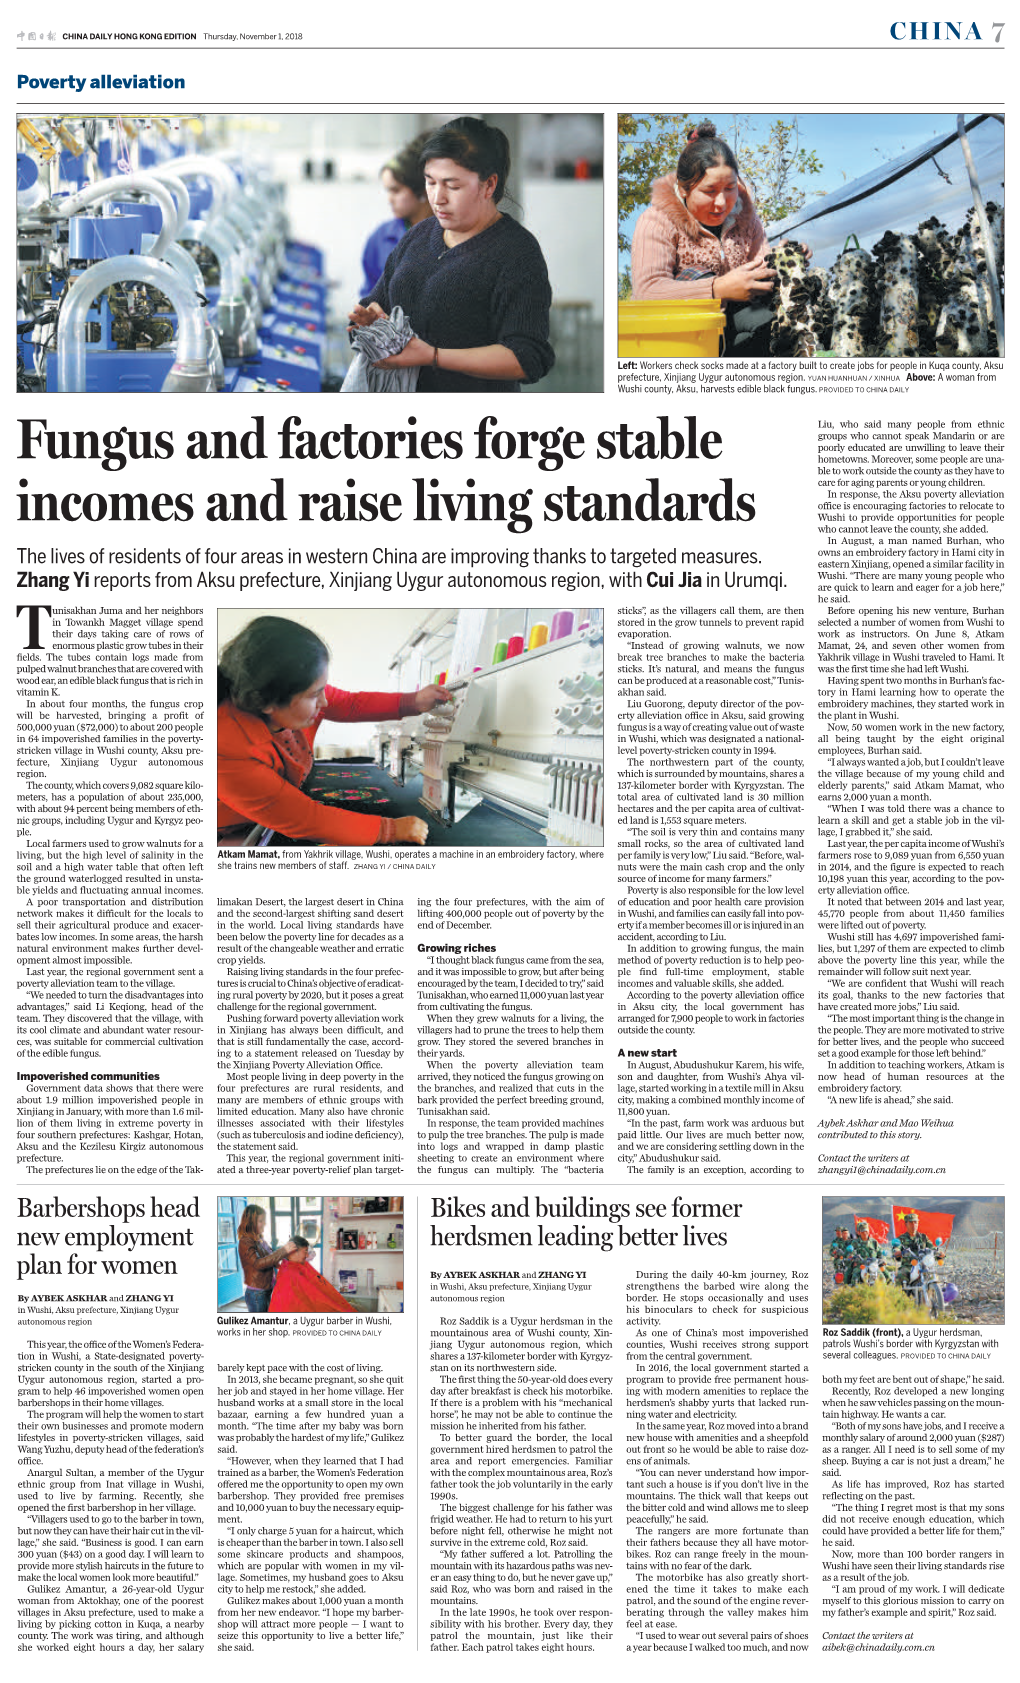 Fungus and Factories Forge Stable Incomes and Raise